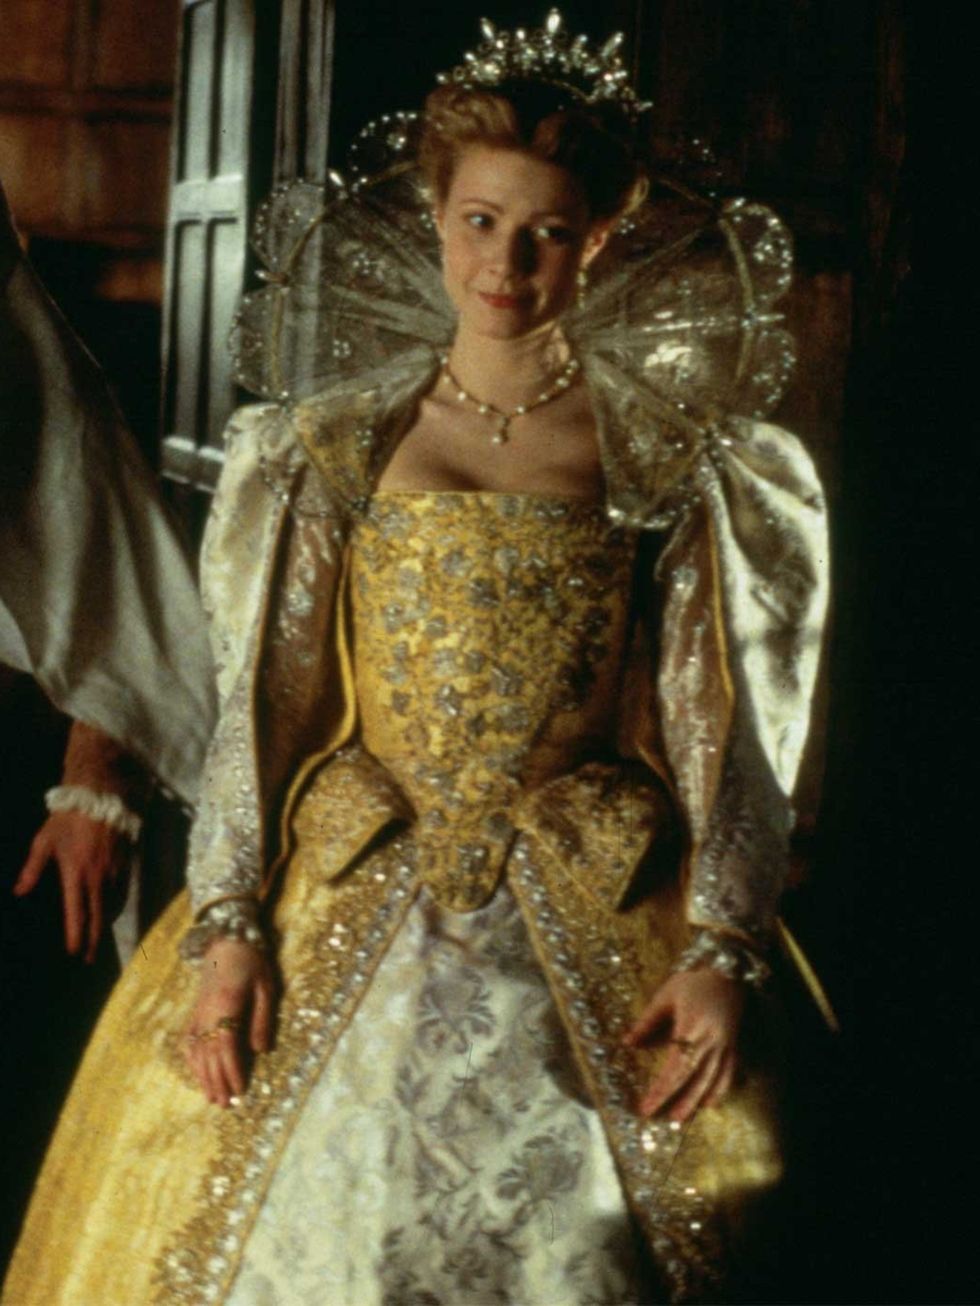 <p>Gwyneth Paltrow was in Oscar-winning form in this Elizabethan-era dress designed by Sandy Powell for 'Shakespeare In Love'.</p>